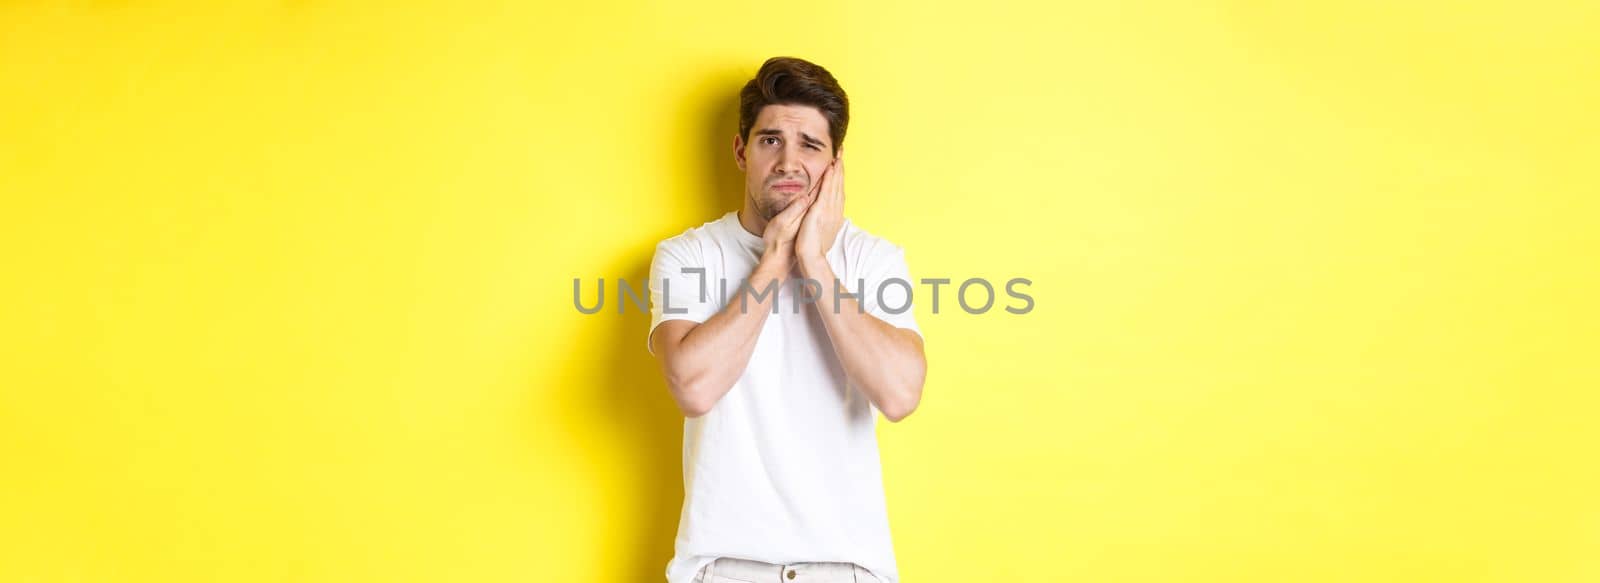 Sad guy complaining on toothache, touching swallen cheek and looking upset, standing over yellow background. Copy space